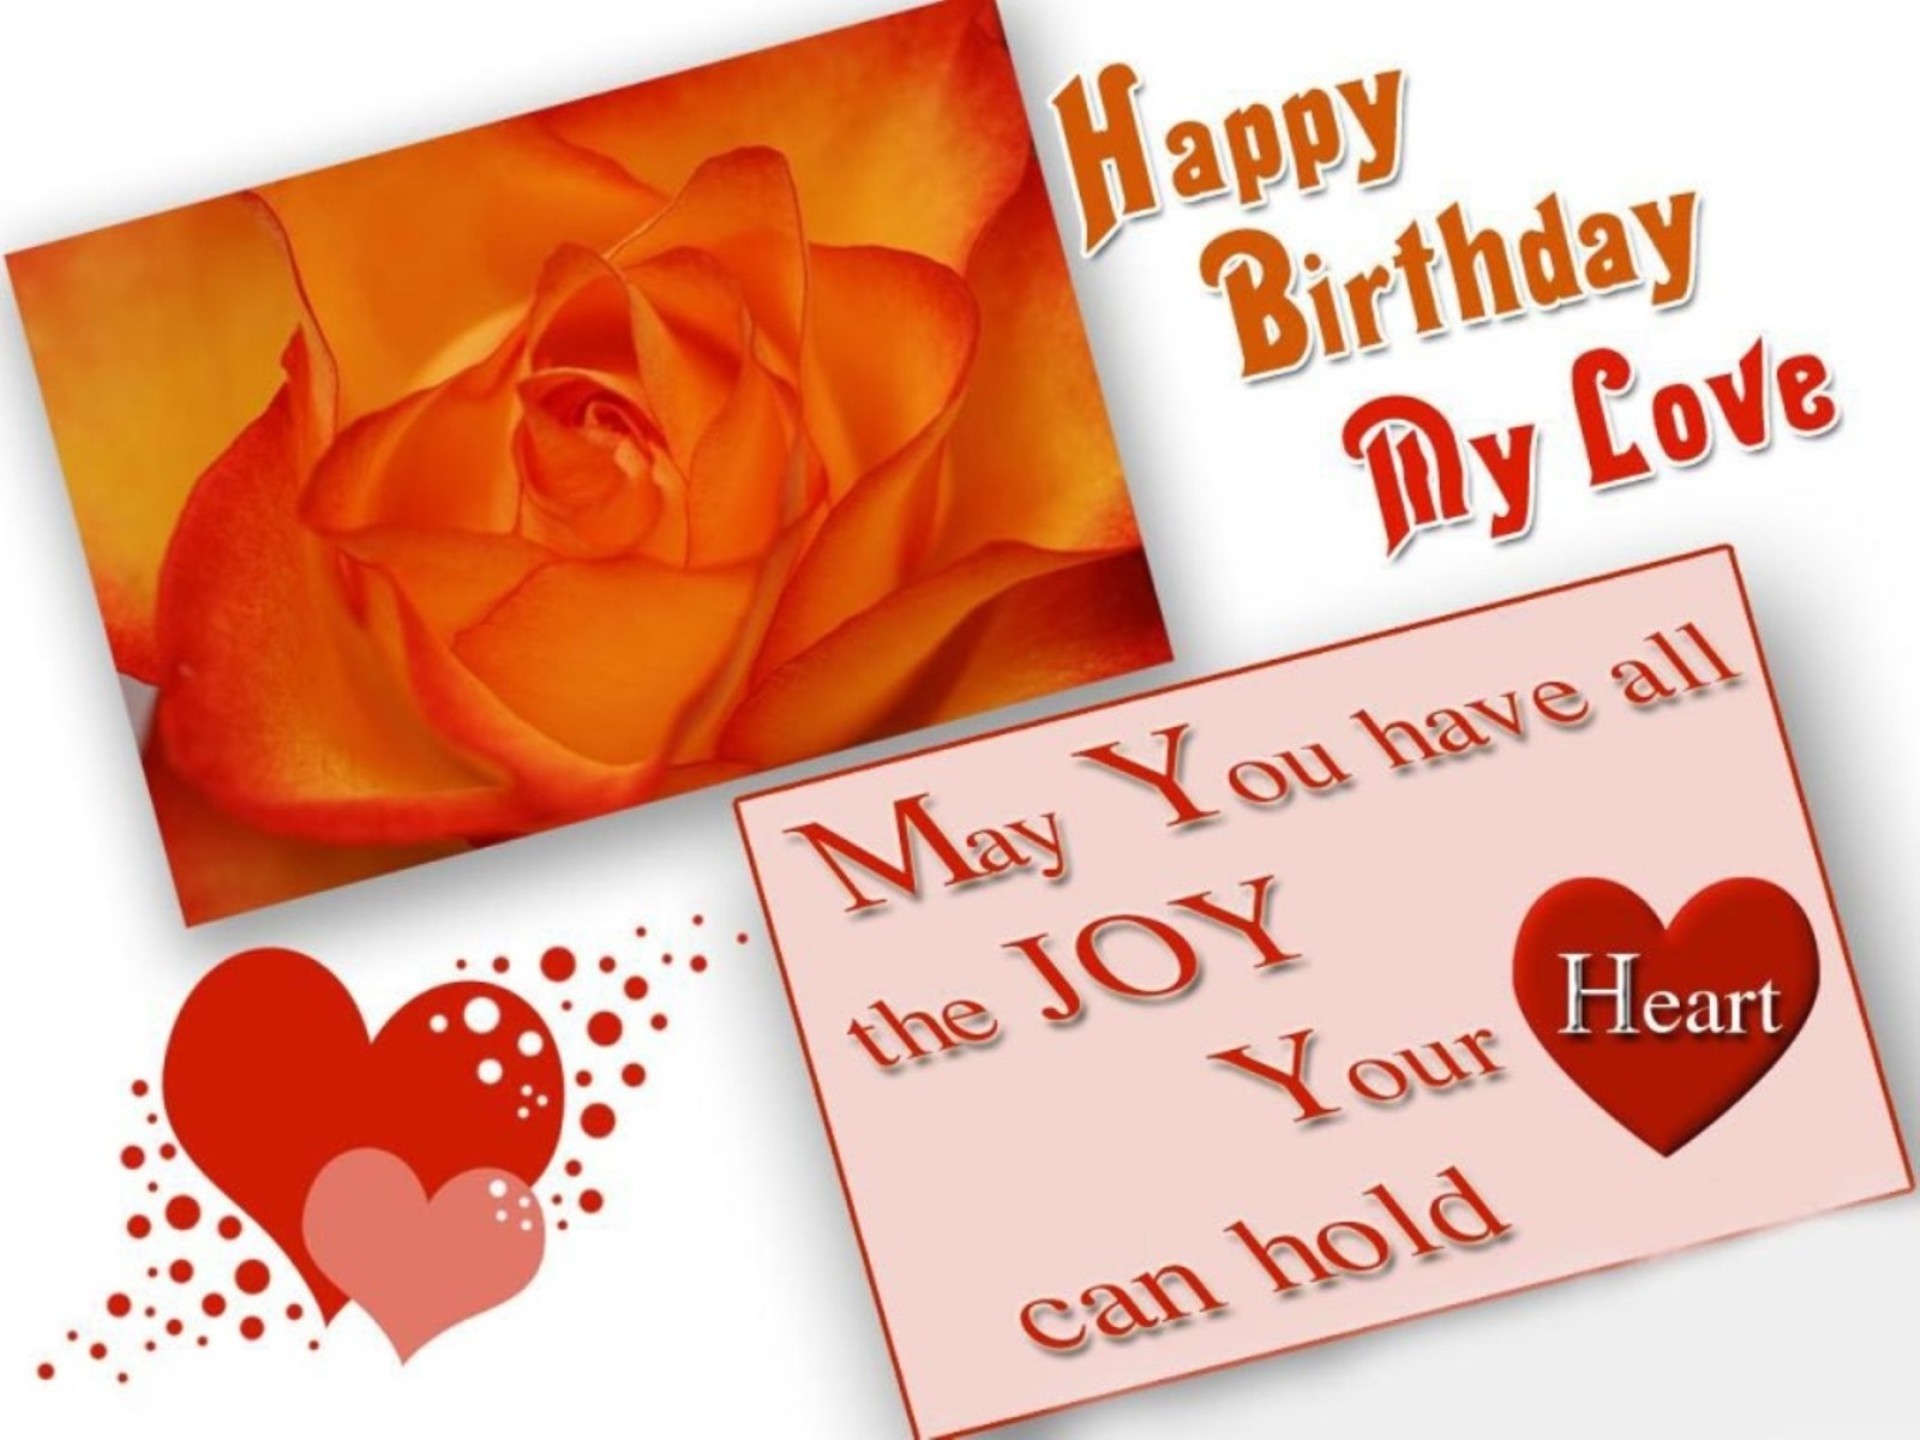 1920x1440 The Collection of Romantic Birthday Wishes That Can Make Your Wife Touched 3